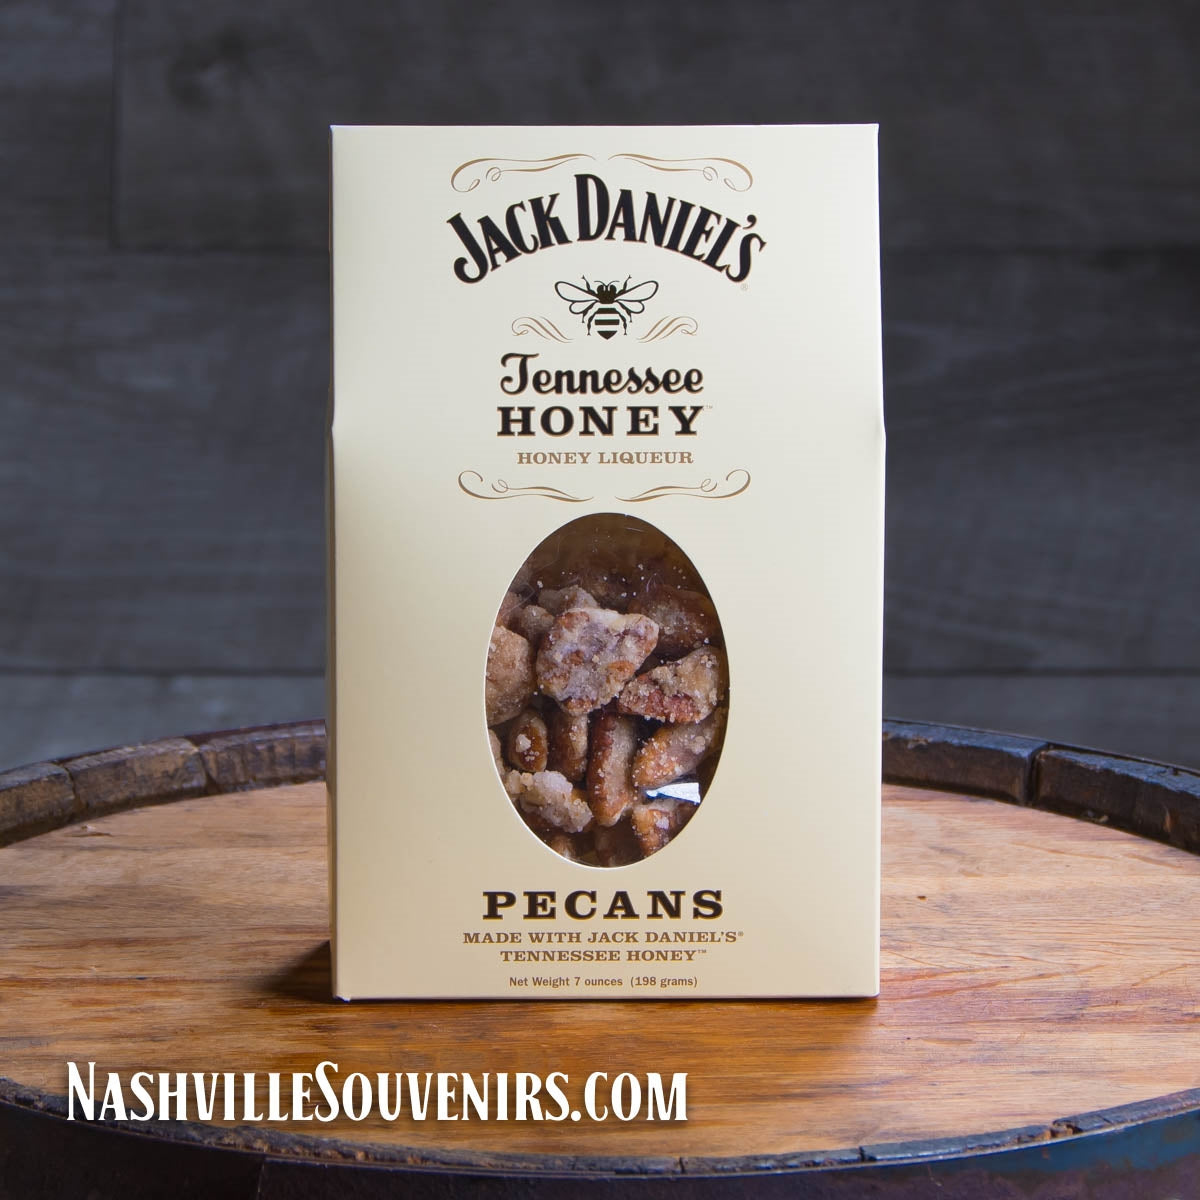 They don't come any sweeter than these Jack Daniel's Whiskey Tennessee Honey Pecans packaged in a resealable cardboard container displaying the Jack Daniel's swing and bug logo.